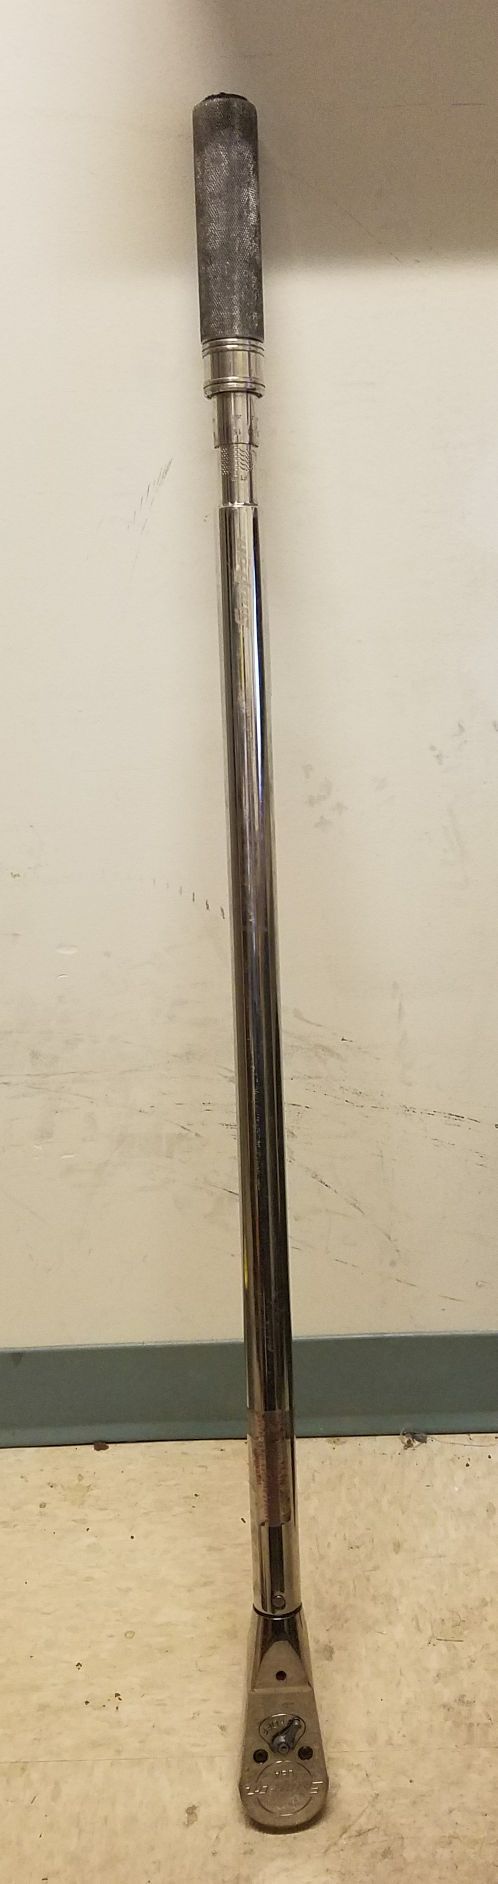 snap-on torque wrench (qd4r600)